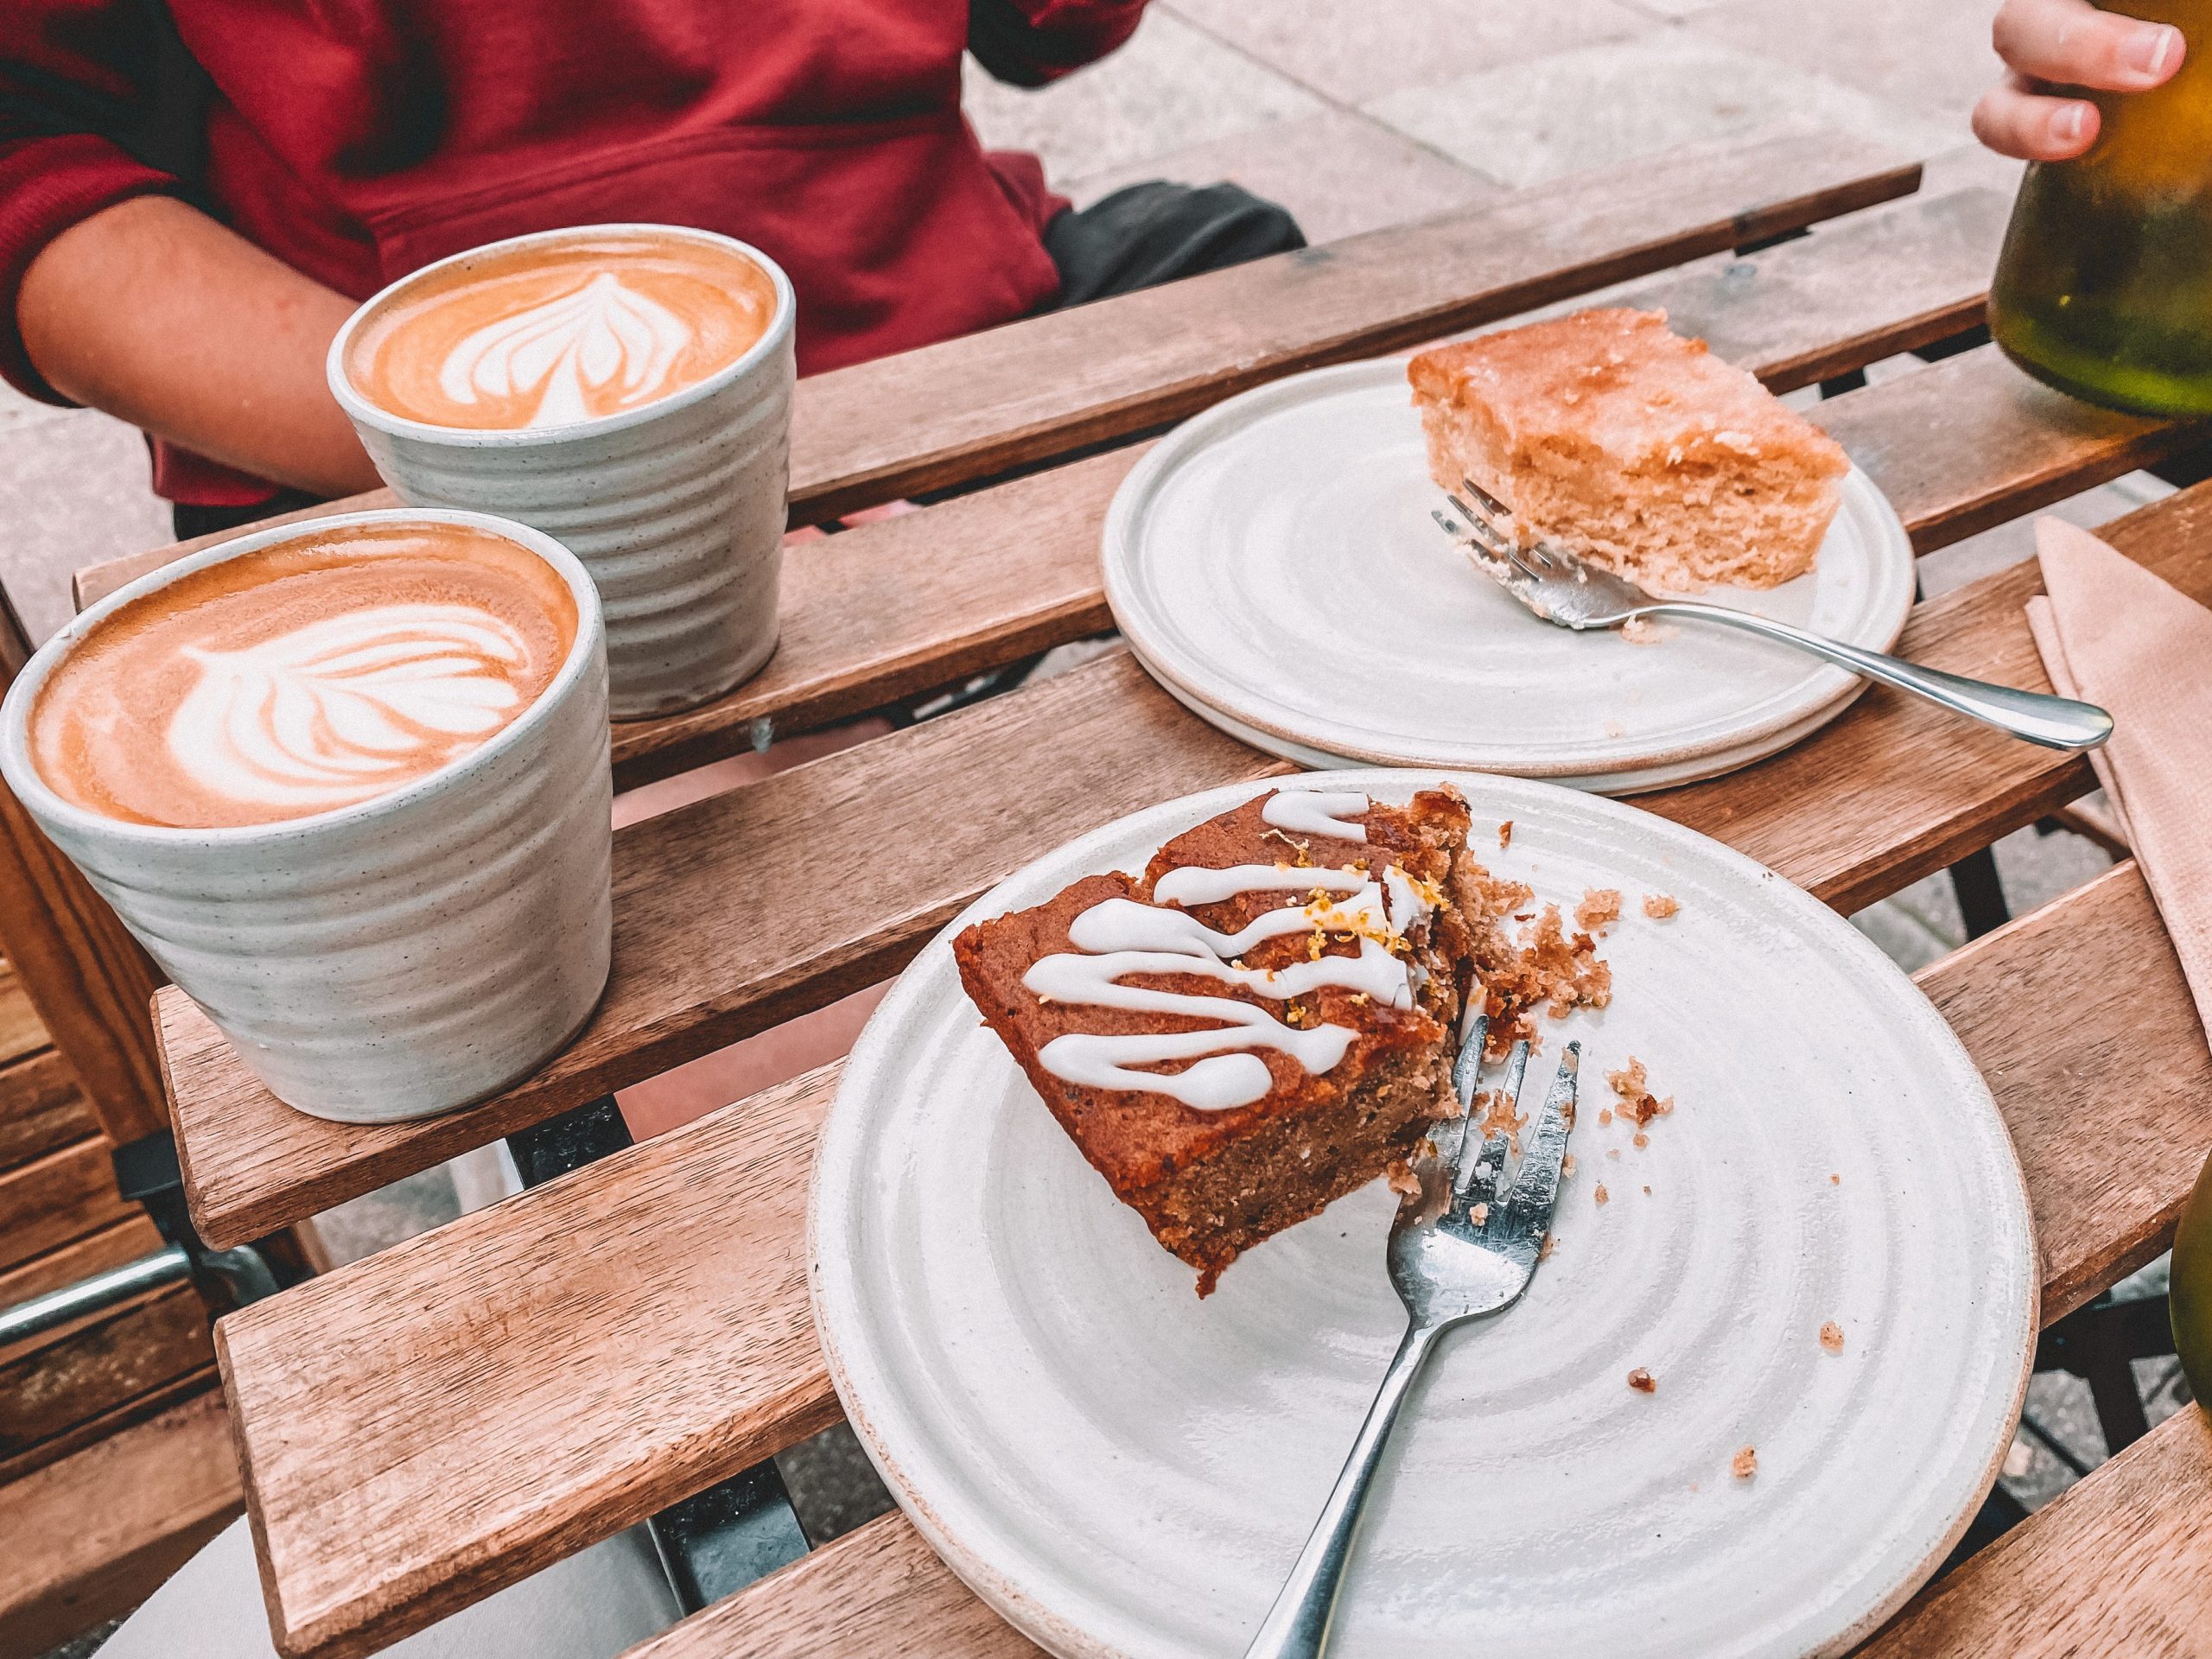 cakes on ceramic plates and flat whites in mugs on an outdoor wooden table